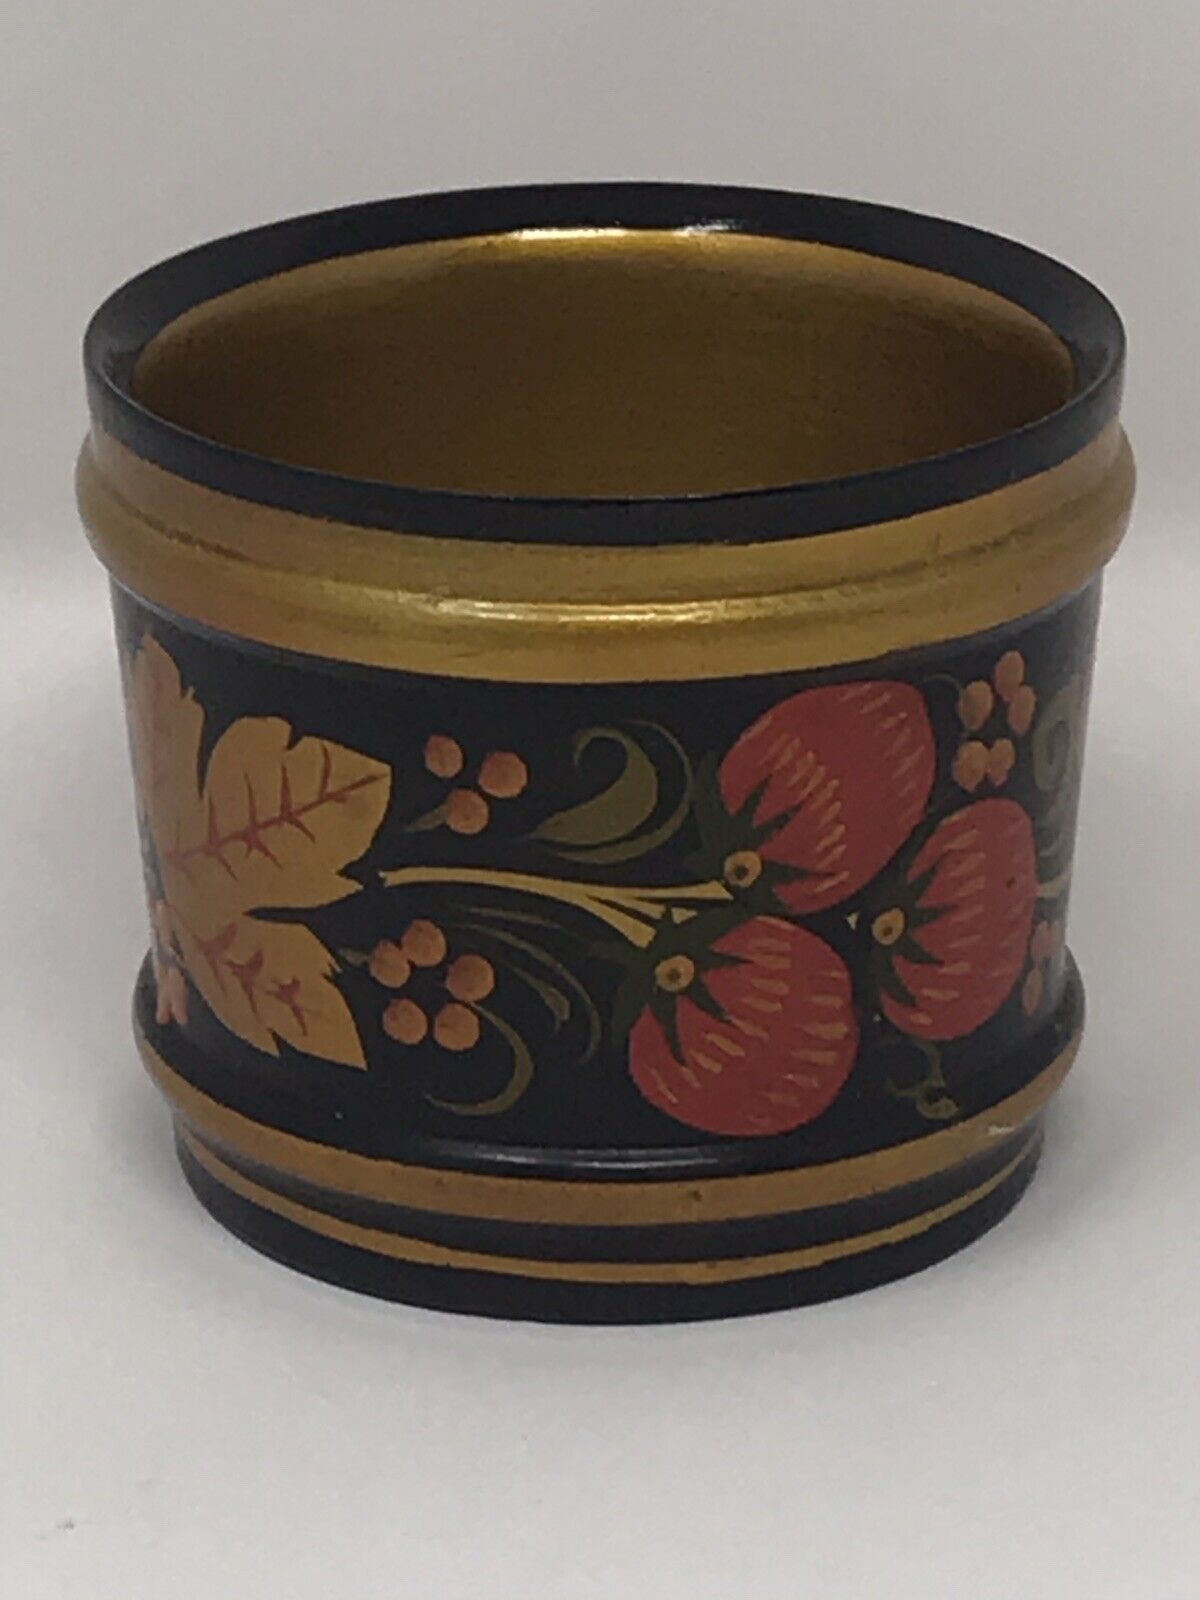 USSR Khokhloma (Hohloma) Hand-painted Wooden Cup 1980s Gold Black Berries MINT